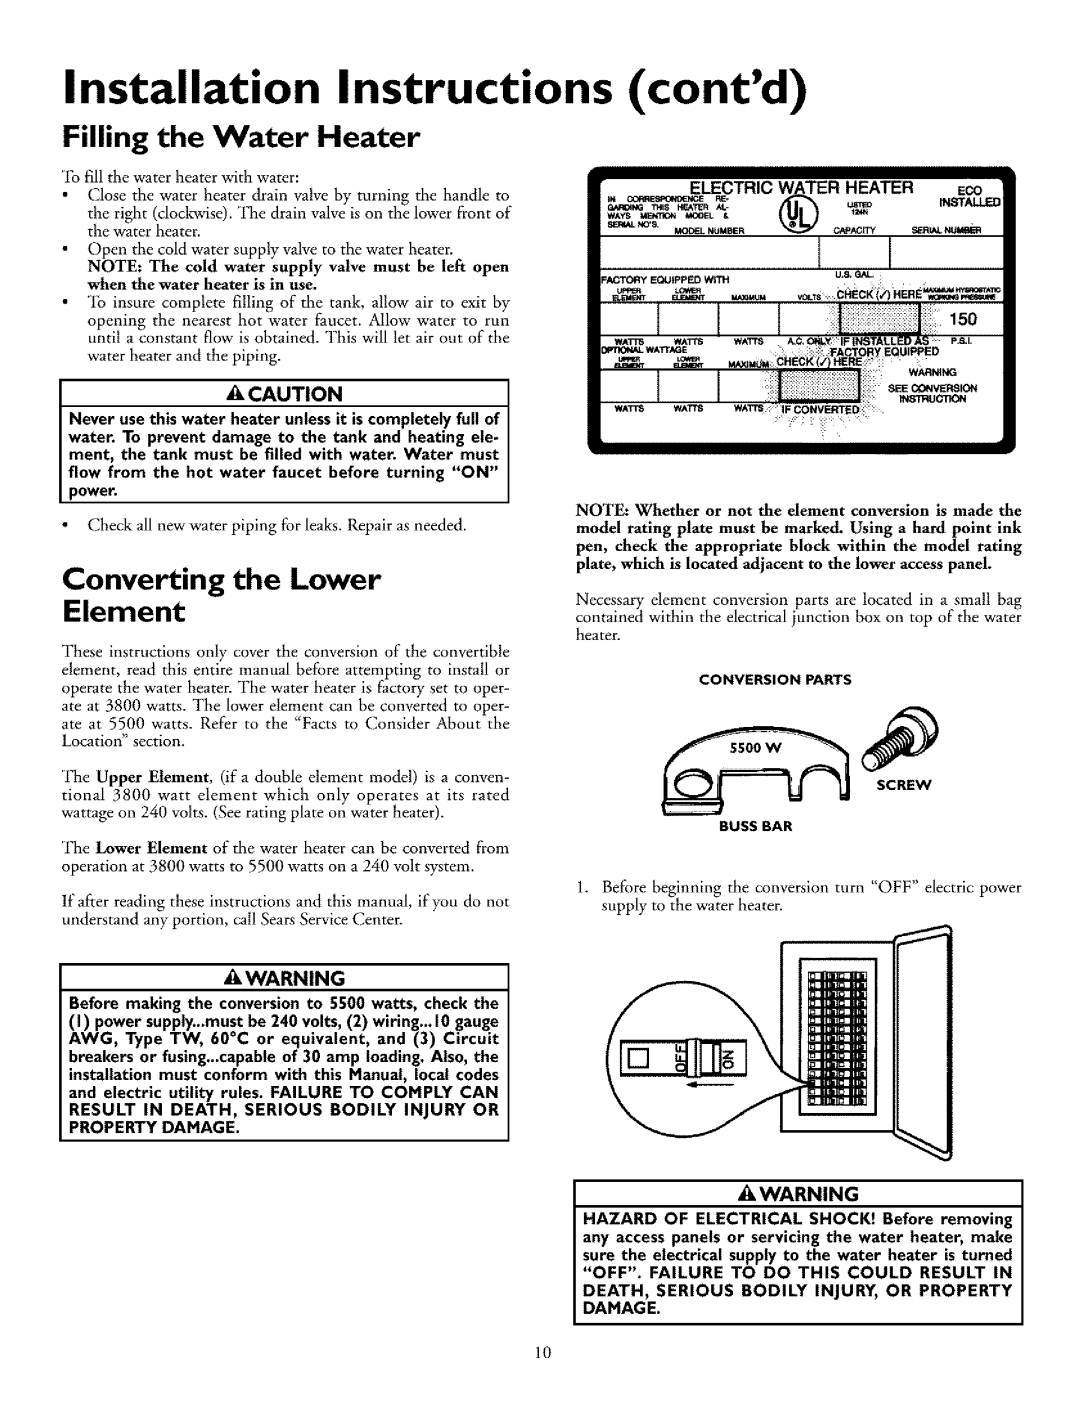 Kenmore 153.326861 Installation Instructions contd, Filling the Water Heater, Converting the Lower Element, Acaution 